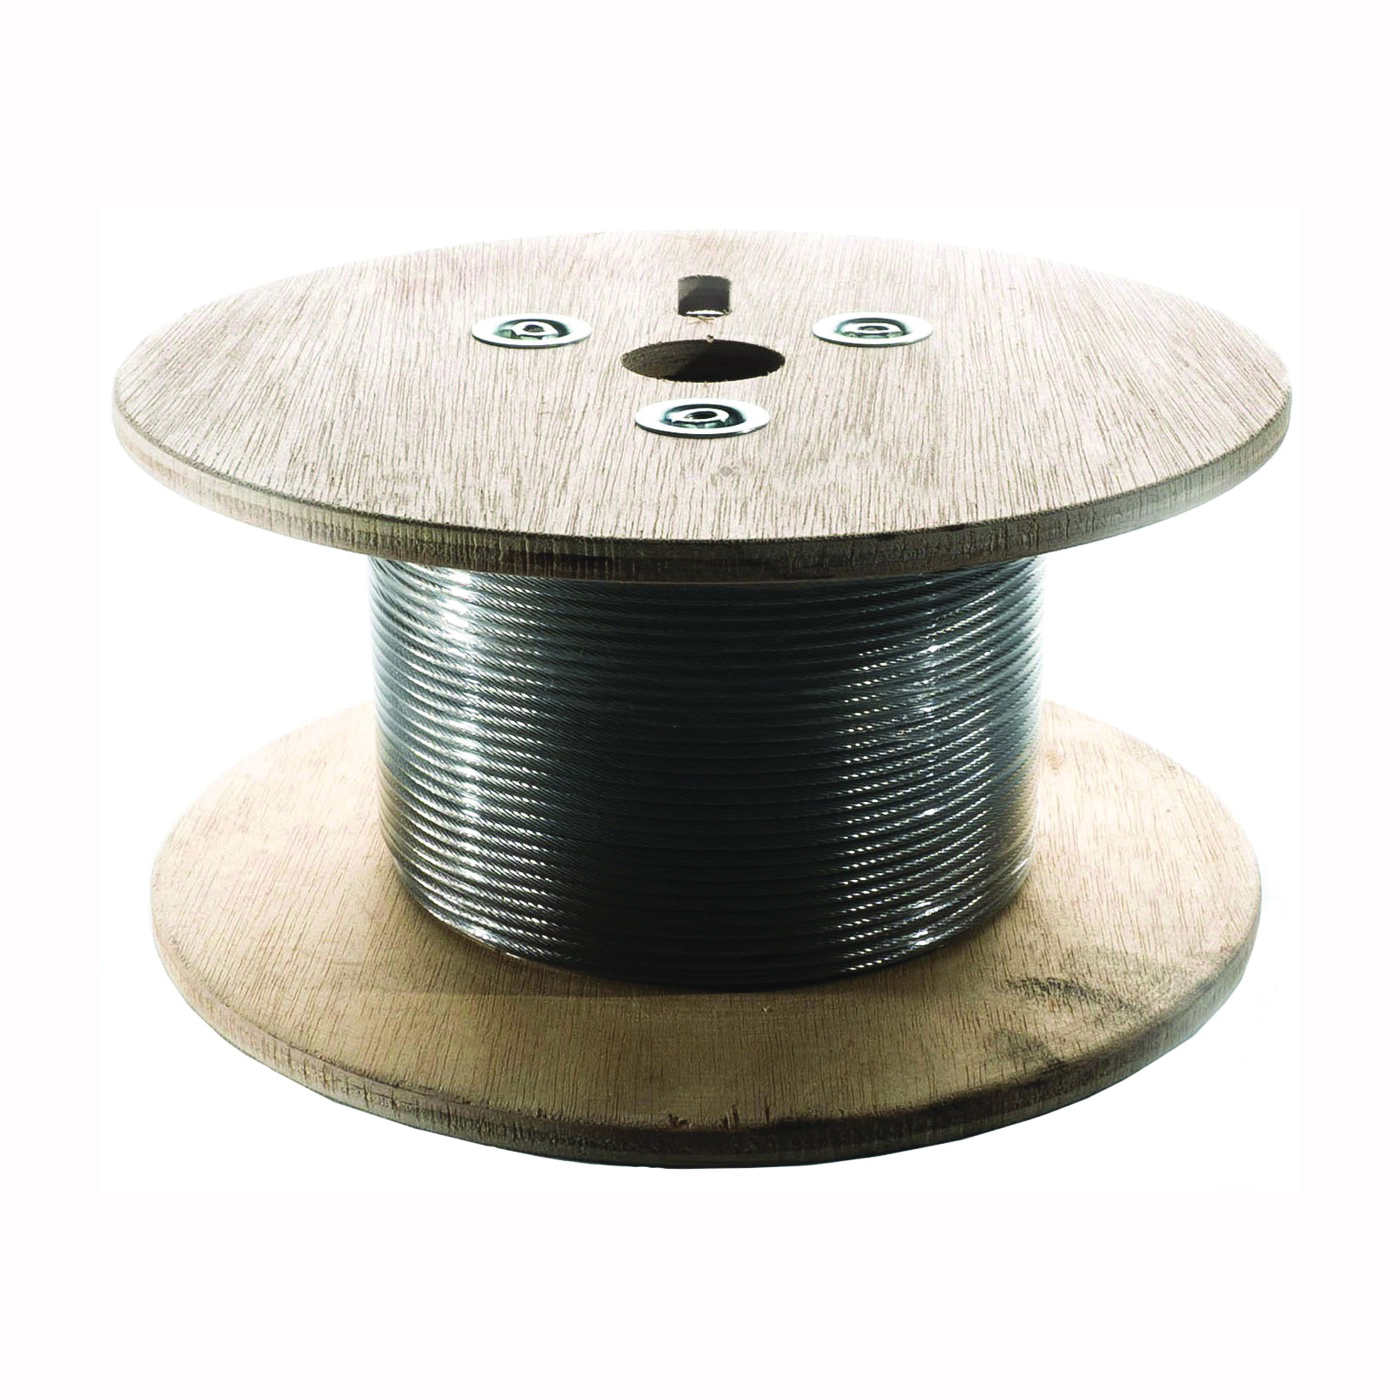 Ram Tail RT WR 3-500 Wire Rope, 3 mm Dia, 500 ft L, 316 Stainless Steel